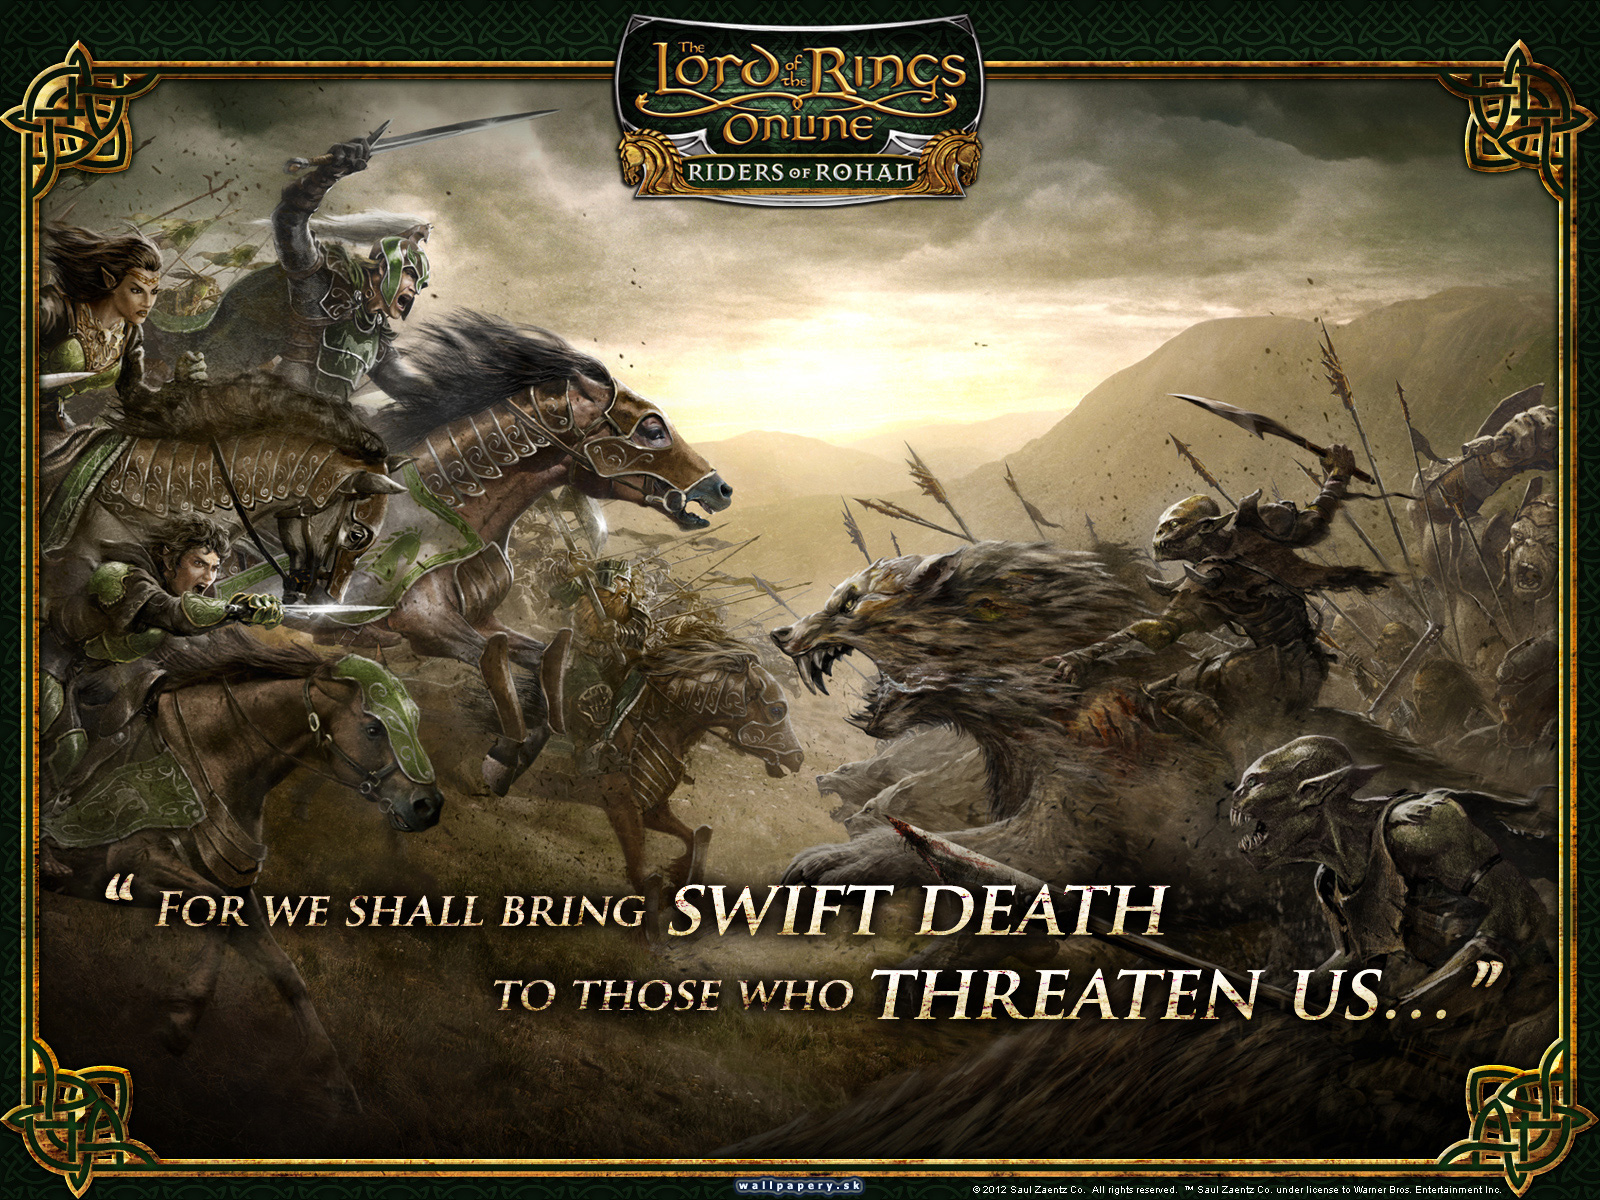 The Lord of the Rings Online: Riders of Rohan - wallpaper 4